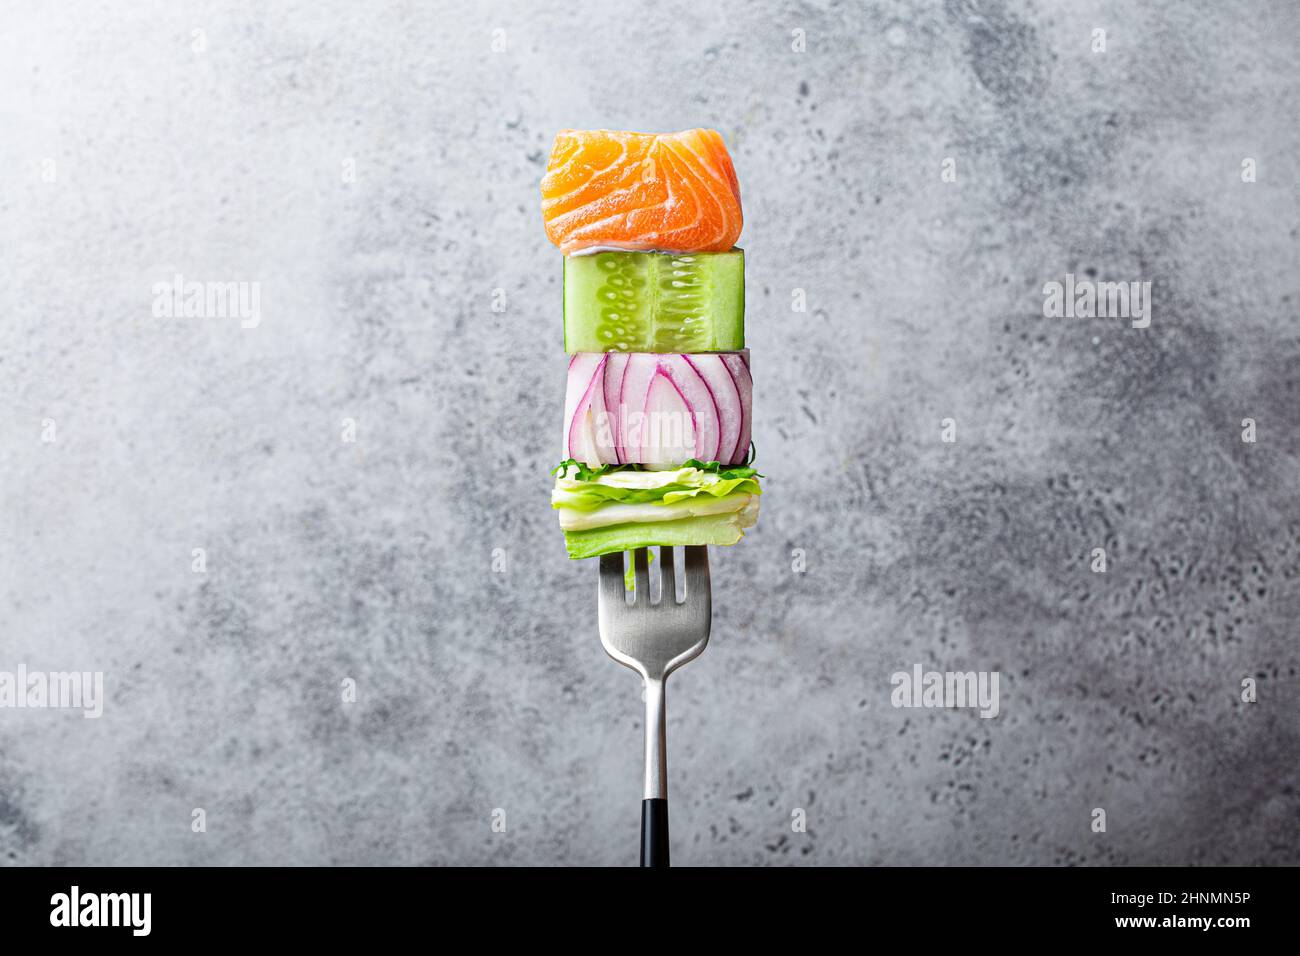 fork with food on it: delicious fillet salmon, cucumber, onion, salad on gray stone rustic background Stock Photo